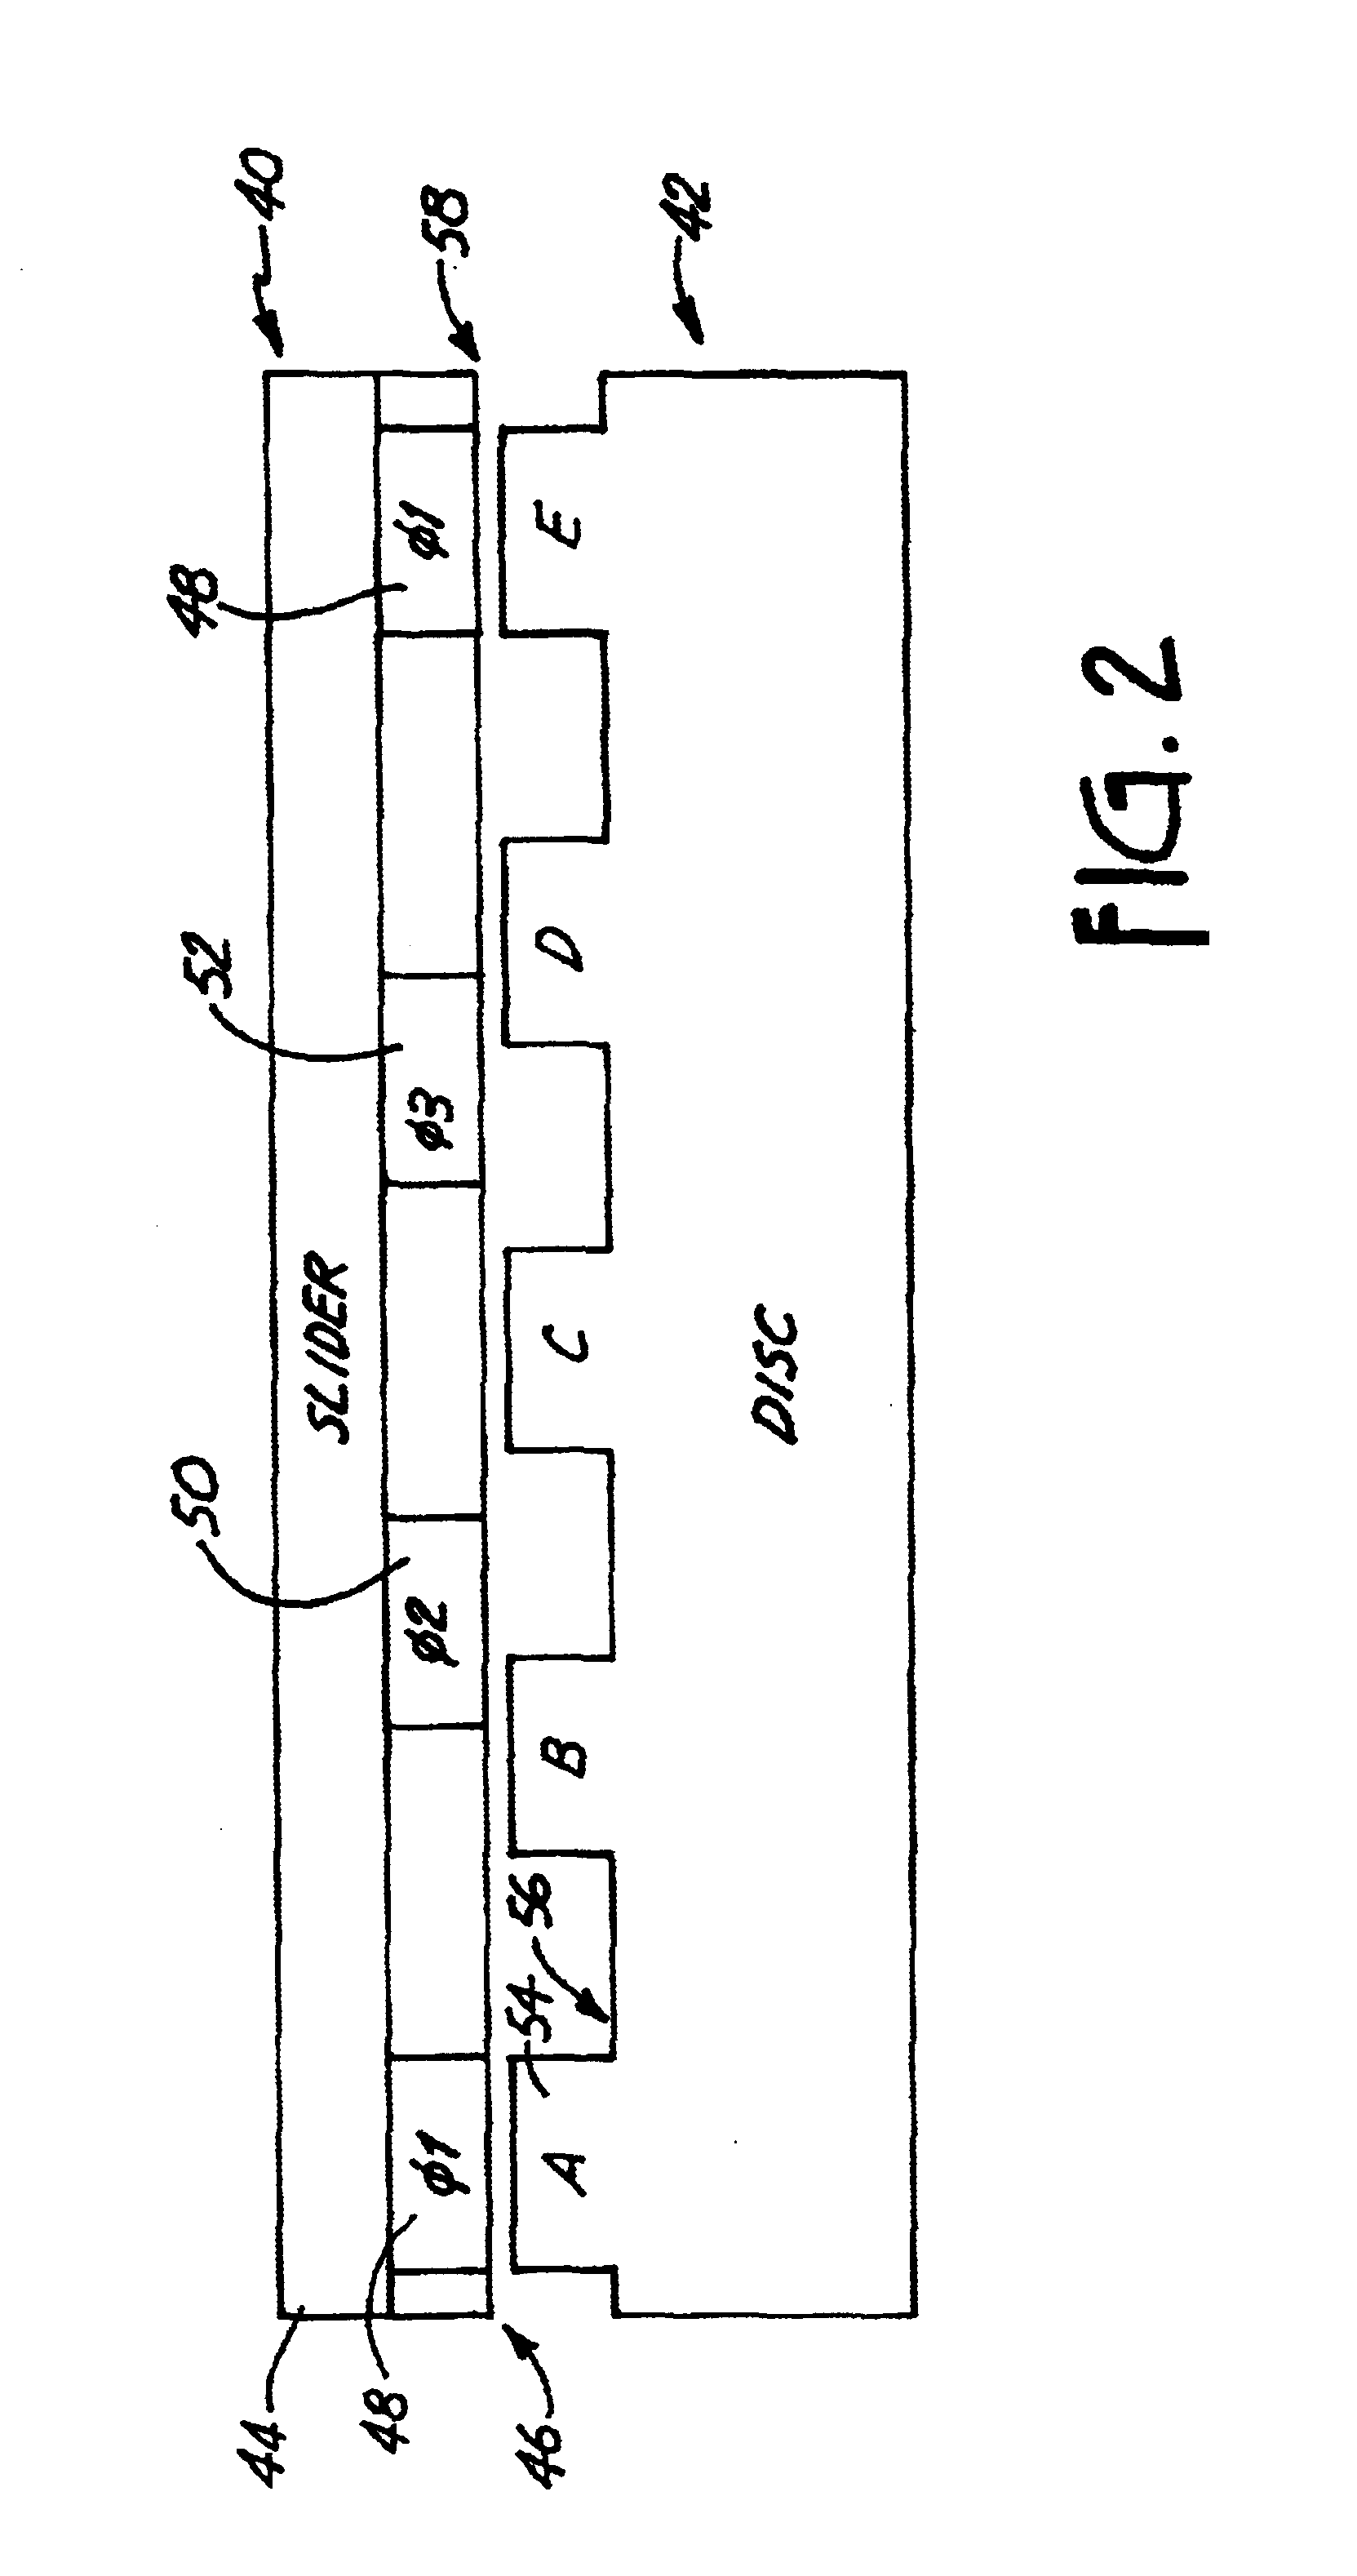 Electrostatic track following using patterned media